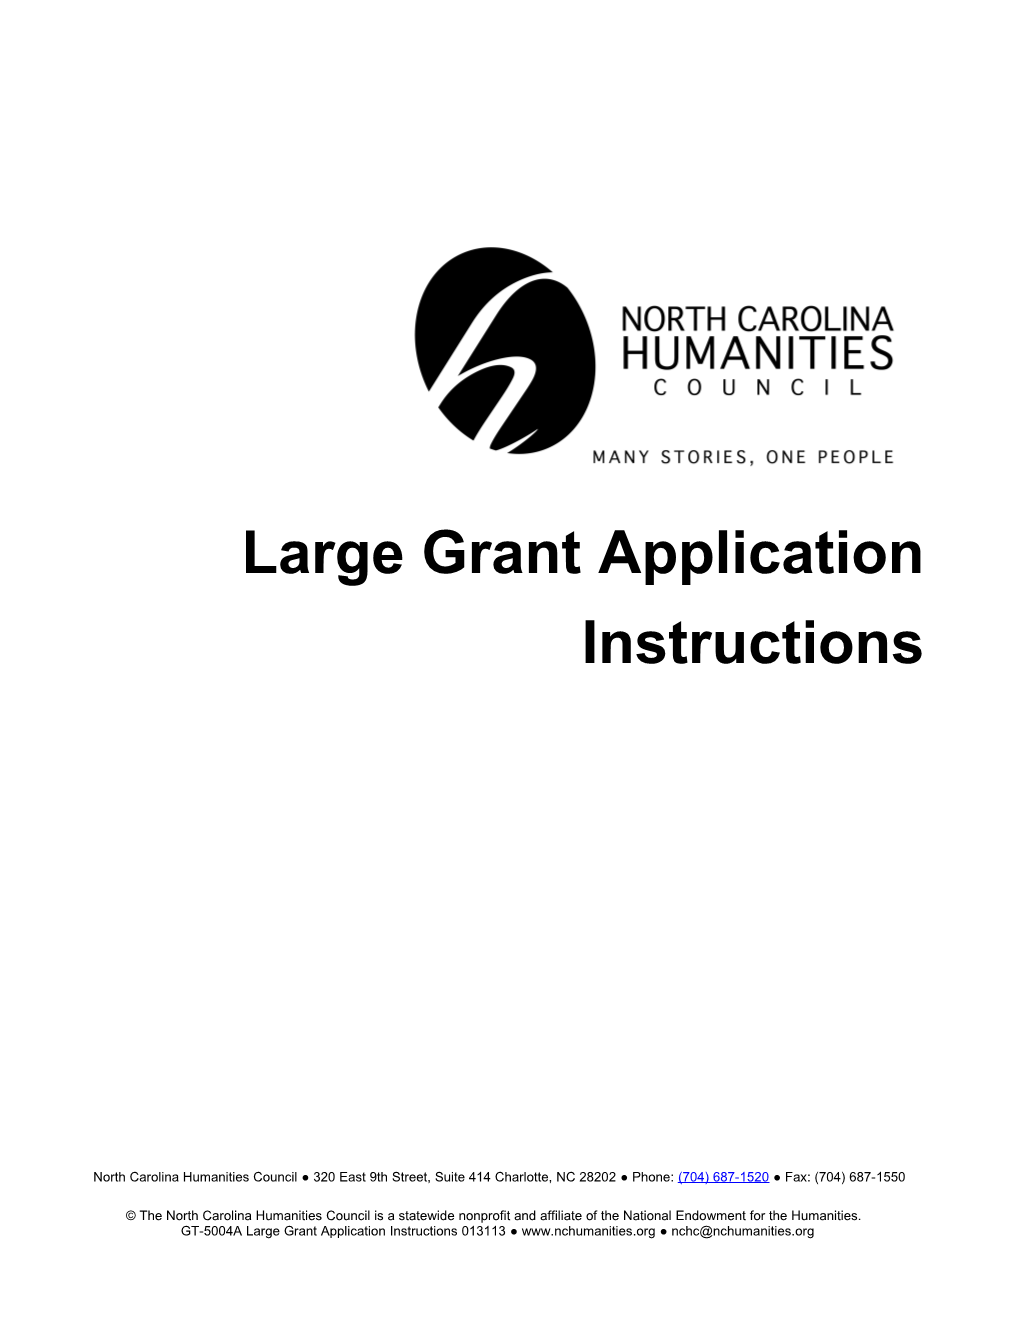 Large Grant Application Instructions